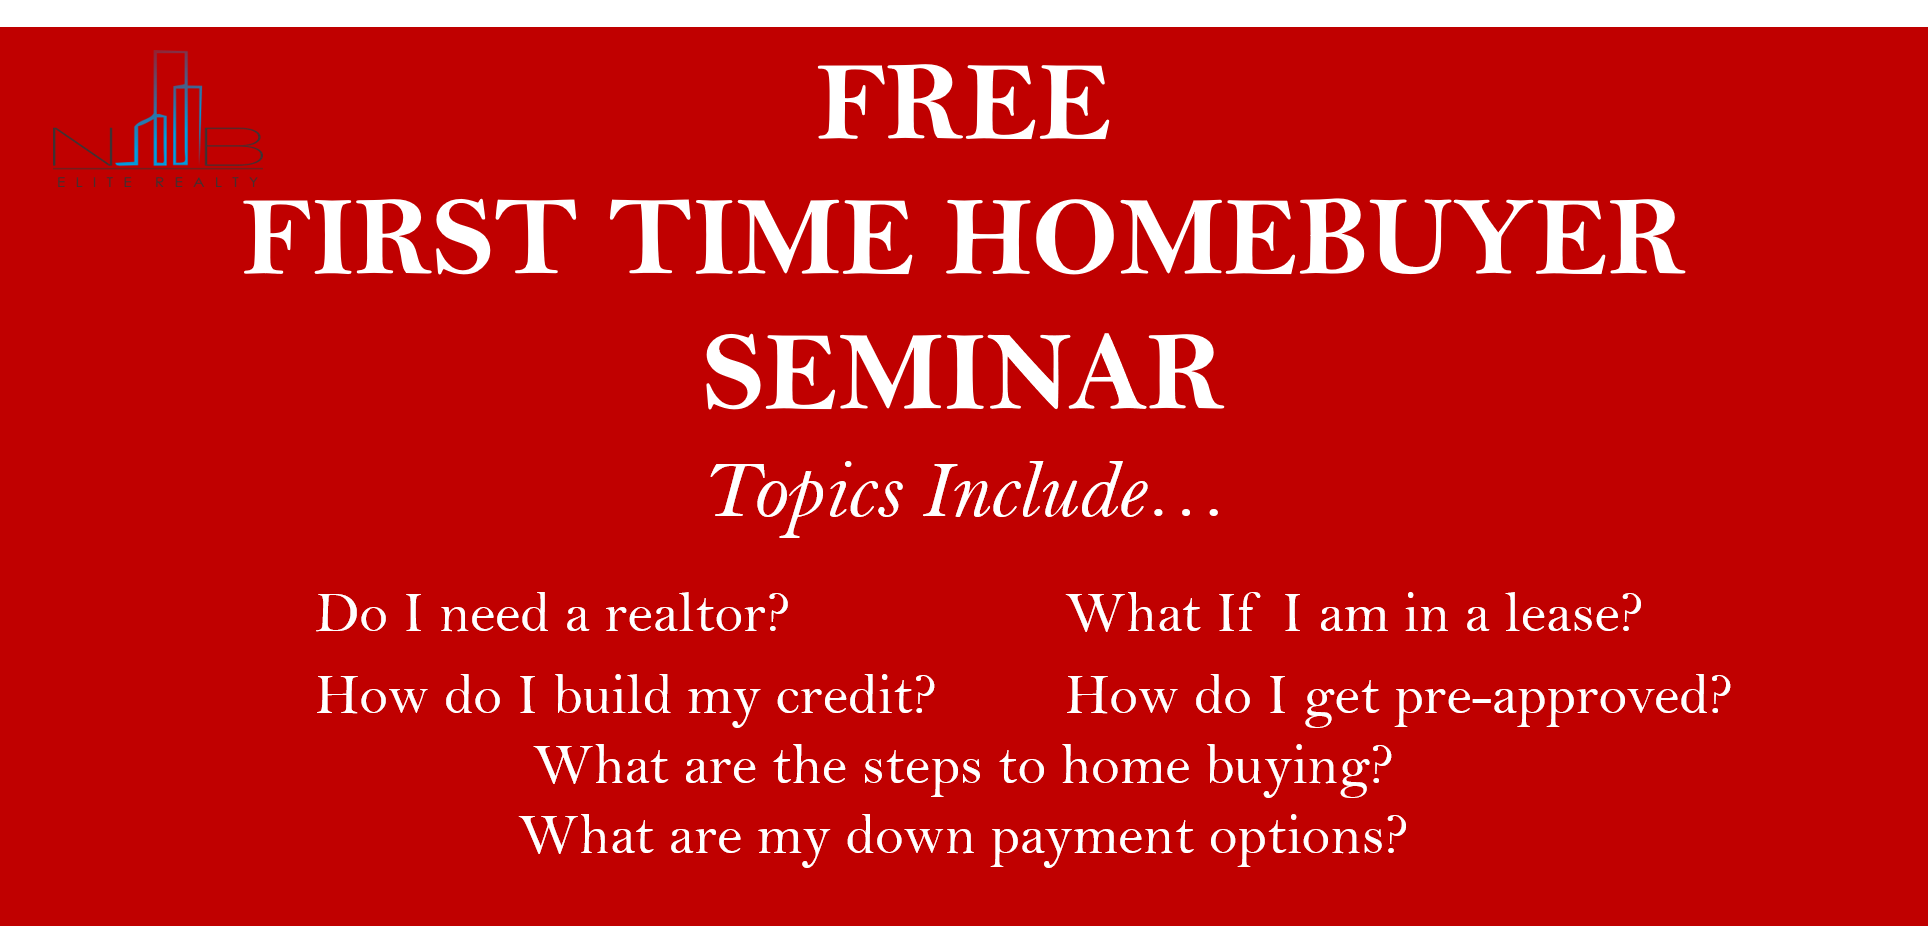 FREE FIRST-TIME HOME BUYER SEMINAR-Houston,TX